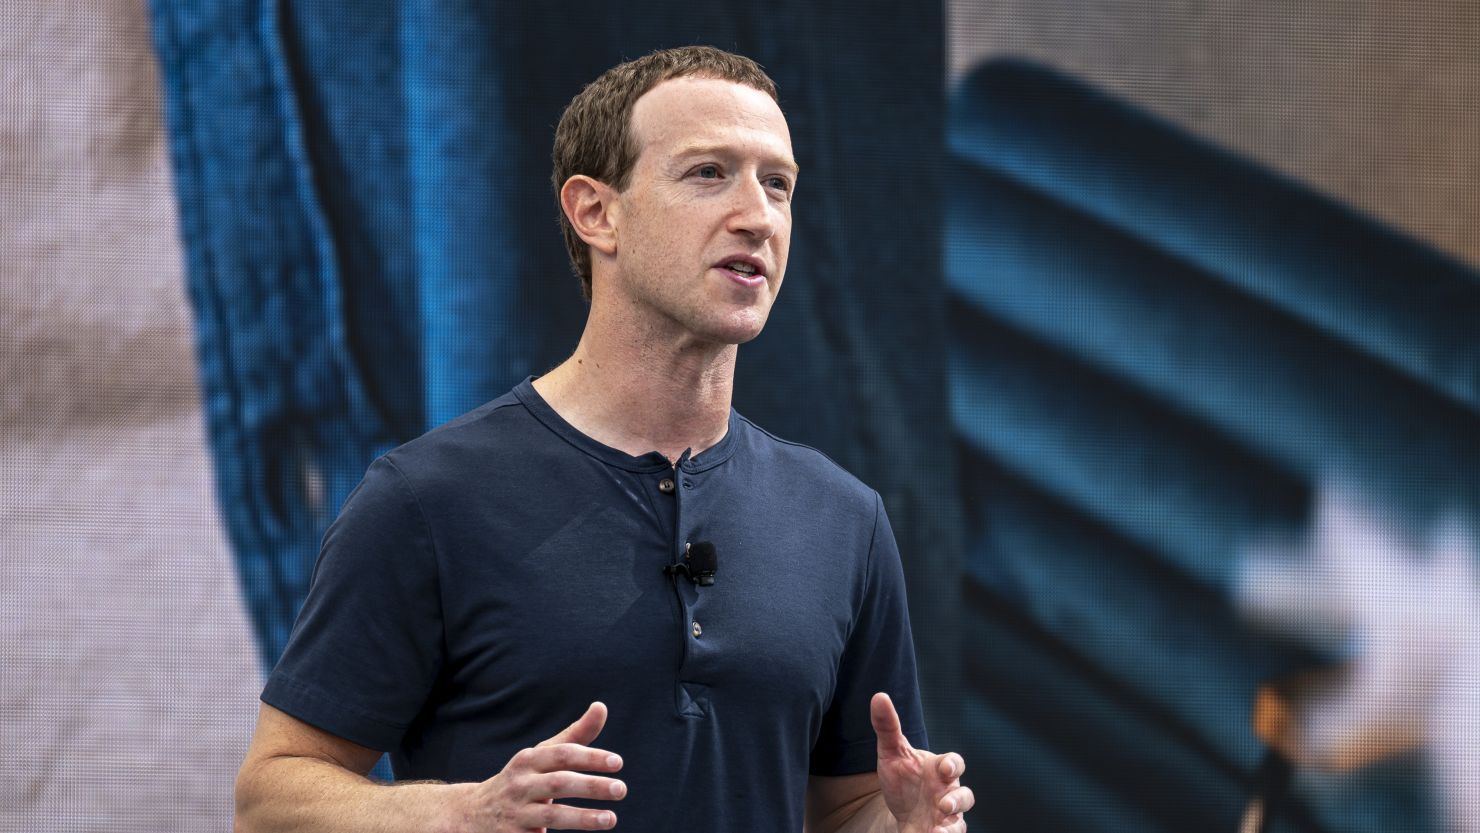 Mark Zuckerberg, chief executive officer of Meta Platforms Inc., during the Meta Connect event in Menlo Park, California, US, on Wednesday, Sept. 27, 2023.